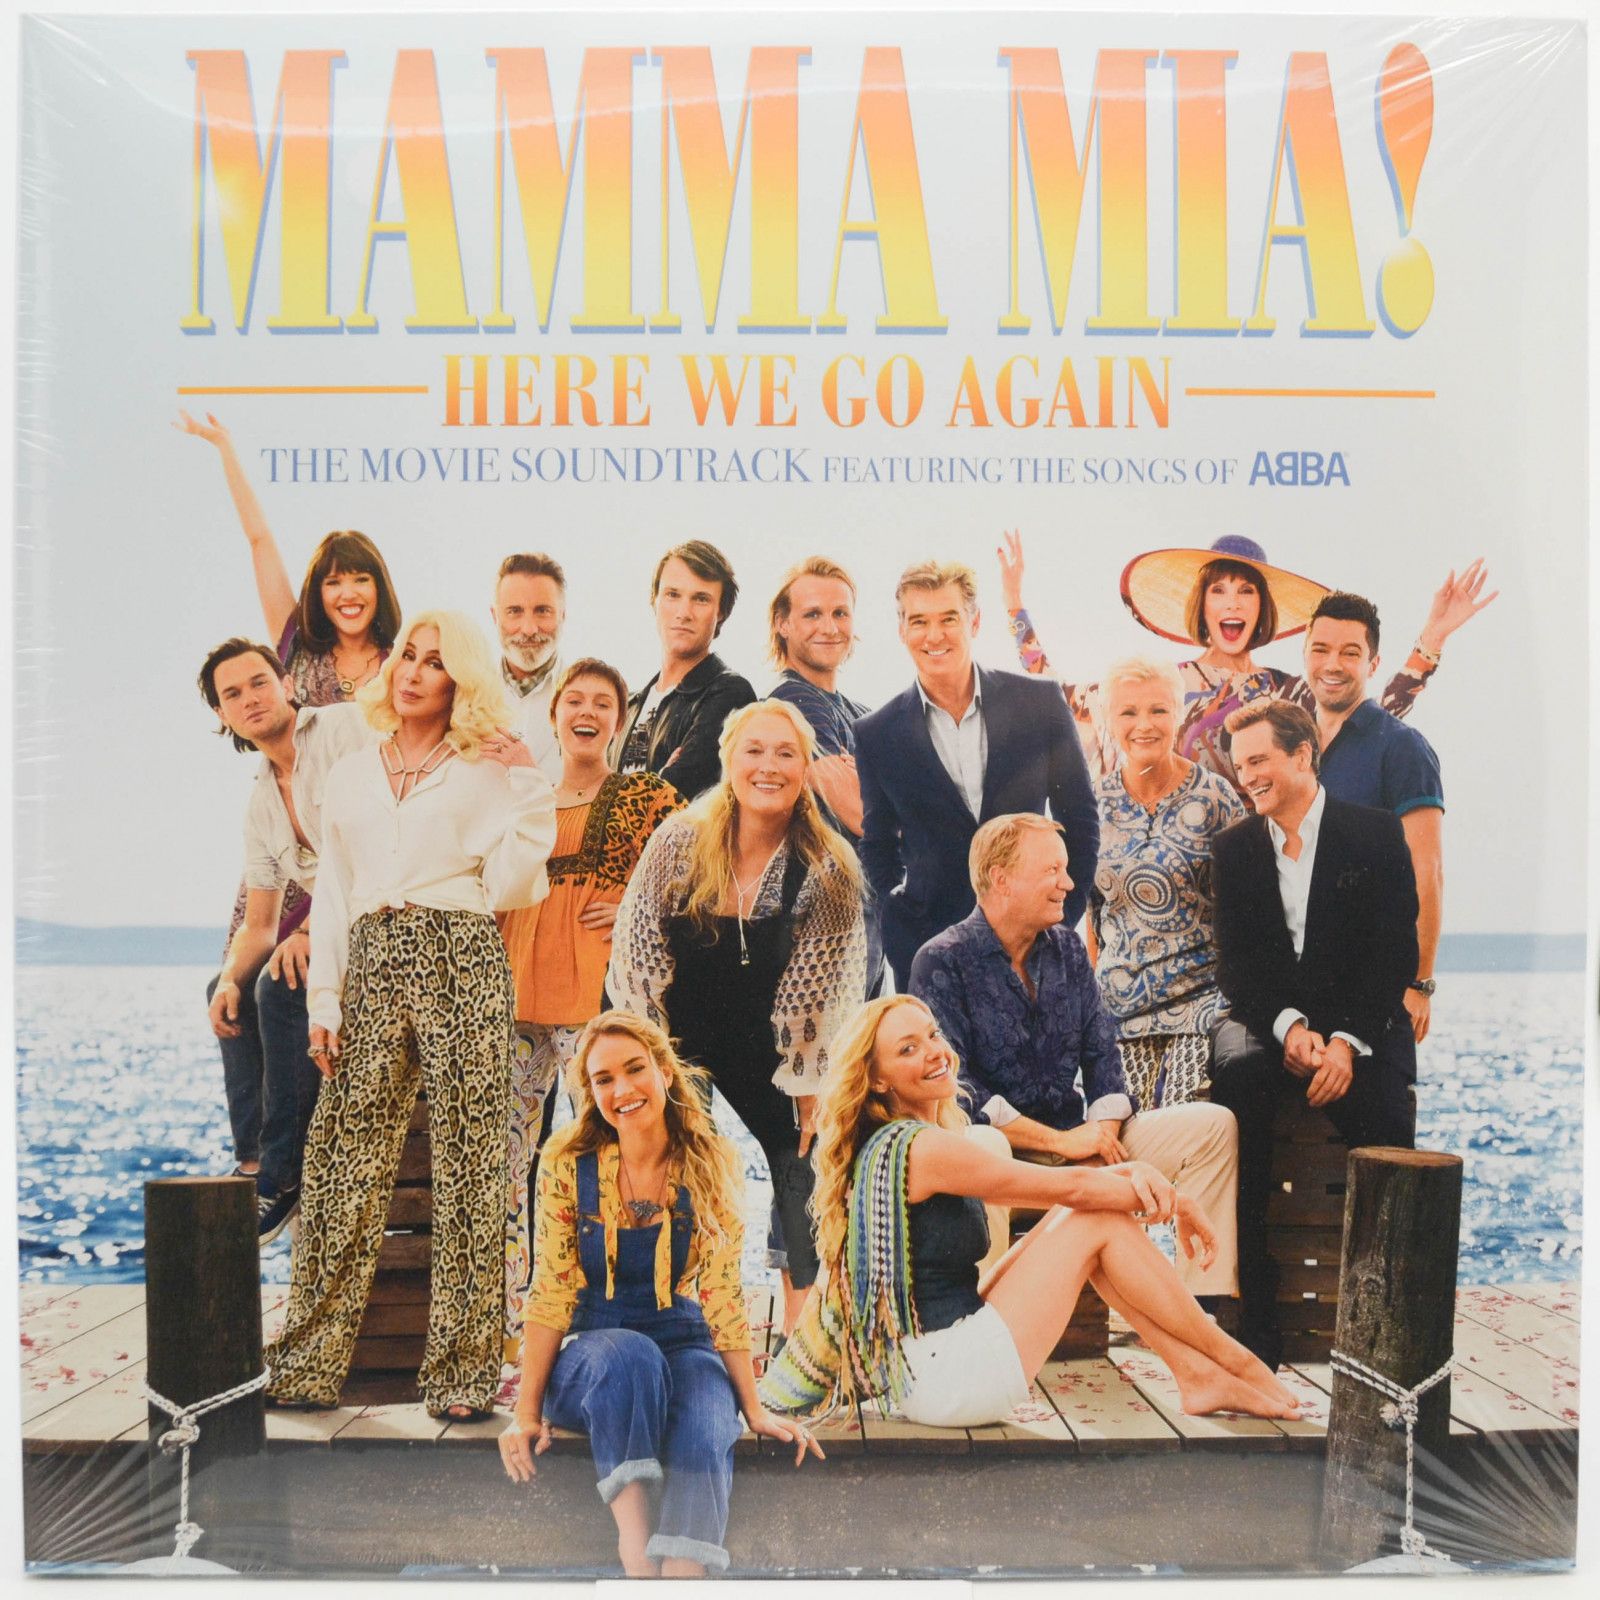 Various — Mamma Mia! Here We Go Again (The Movie Soundtrack Featuring The Songs Of ABBA) (2LP), 2018